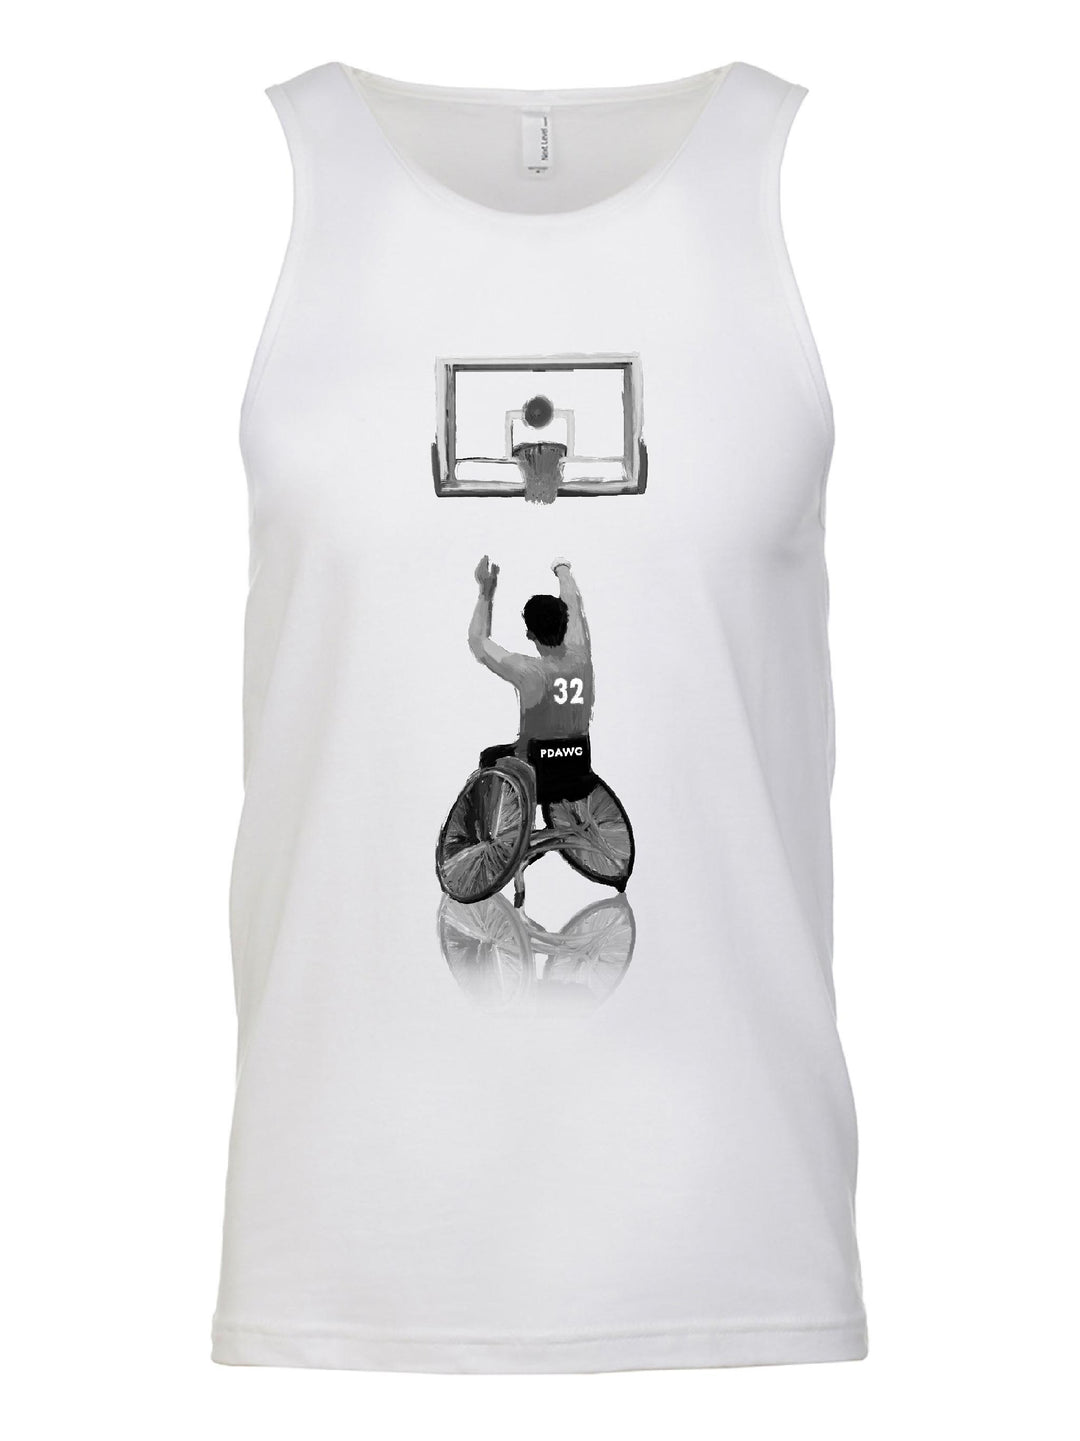 PDAWG Tank Top